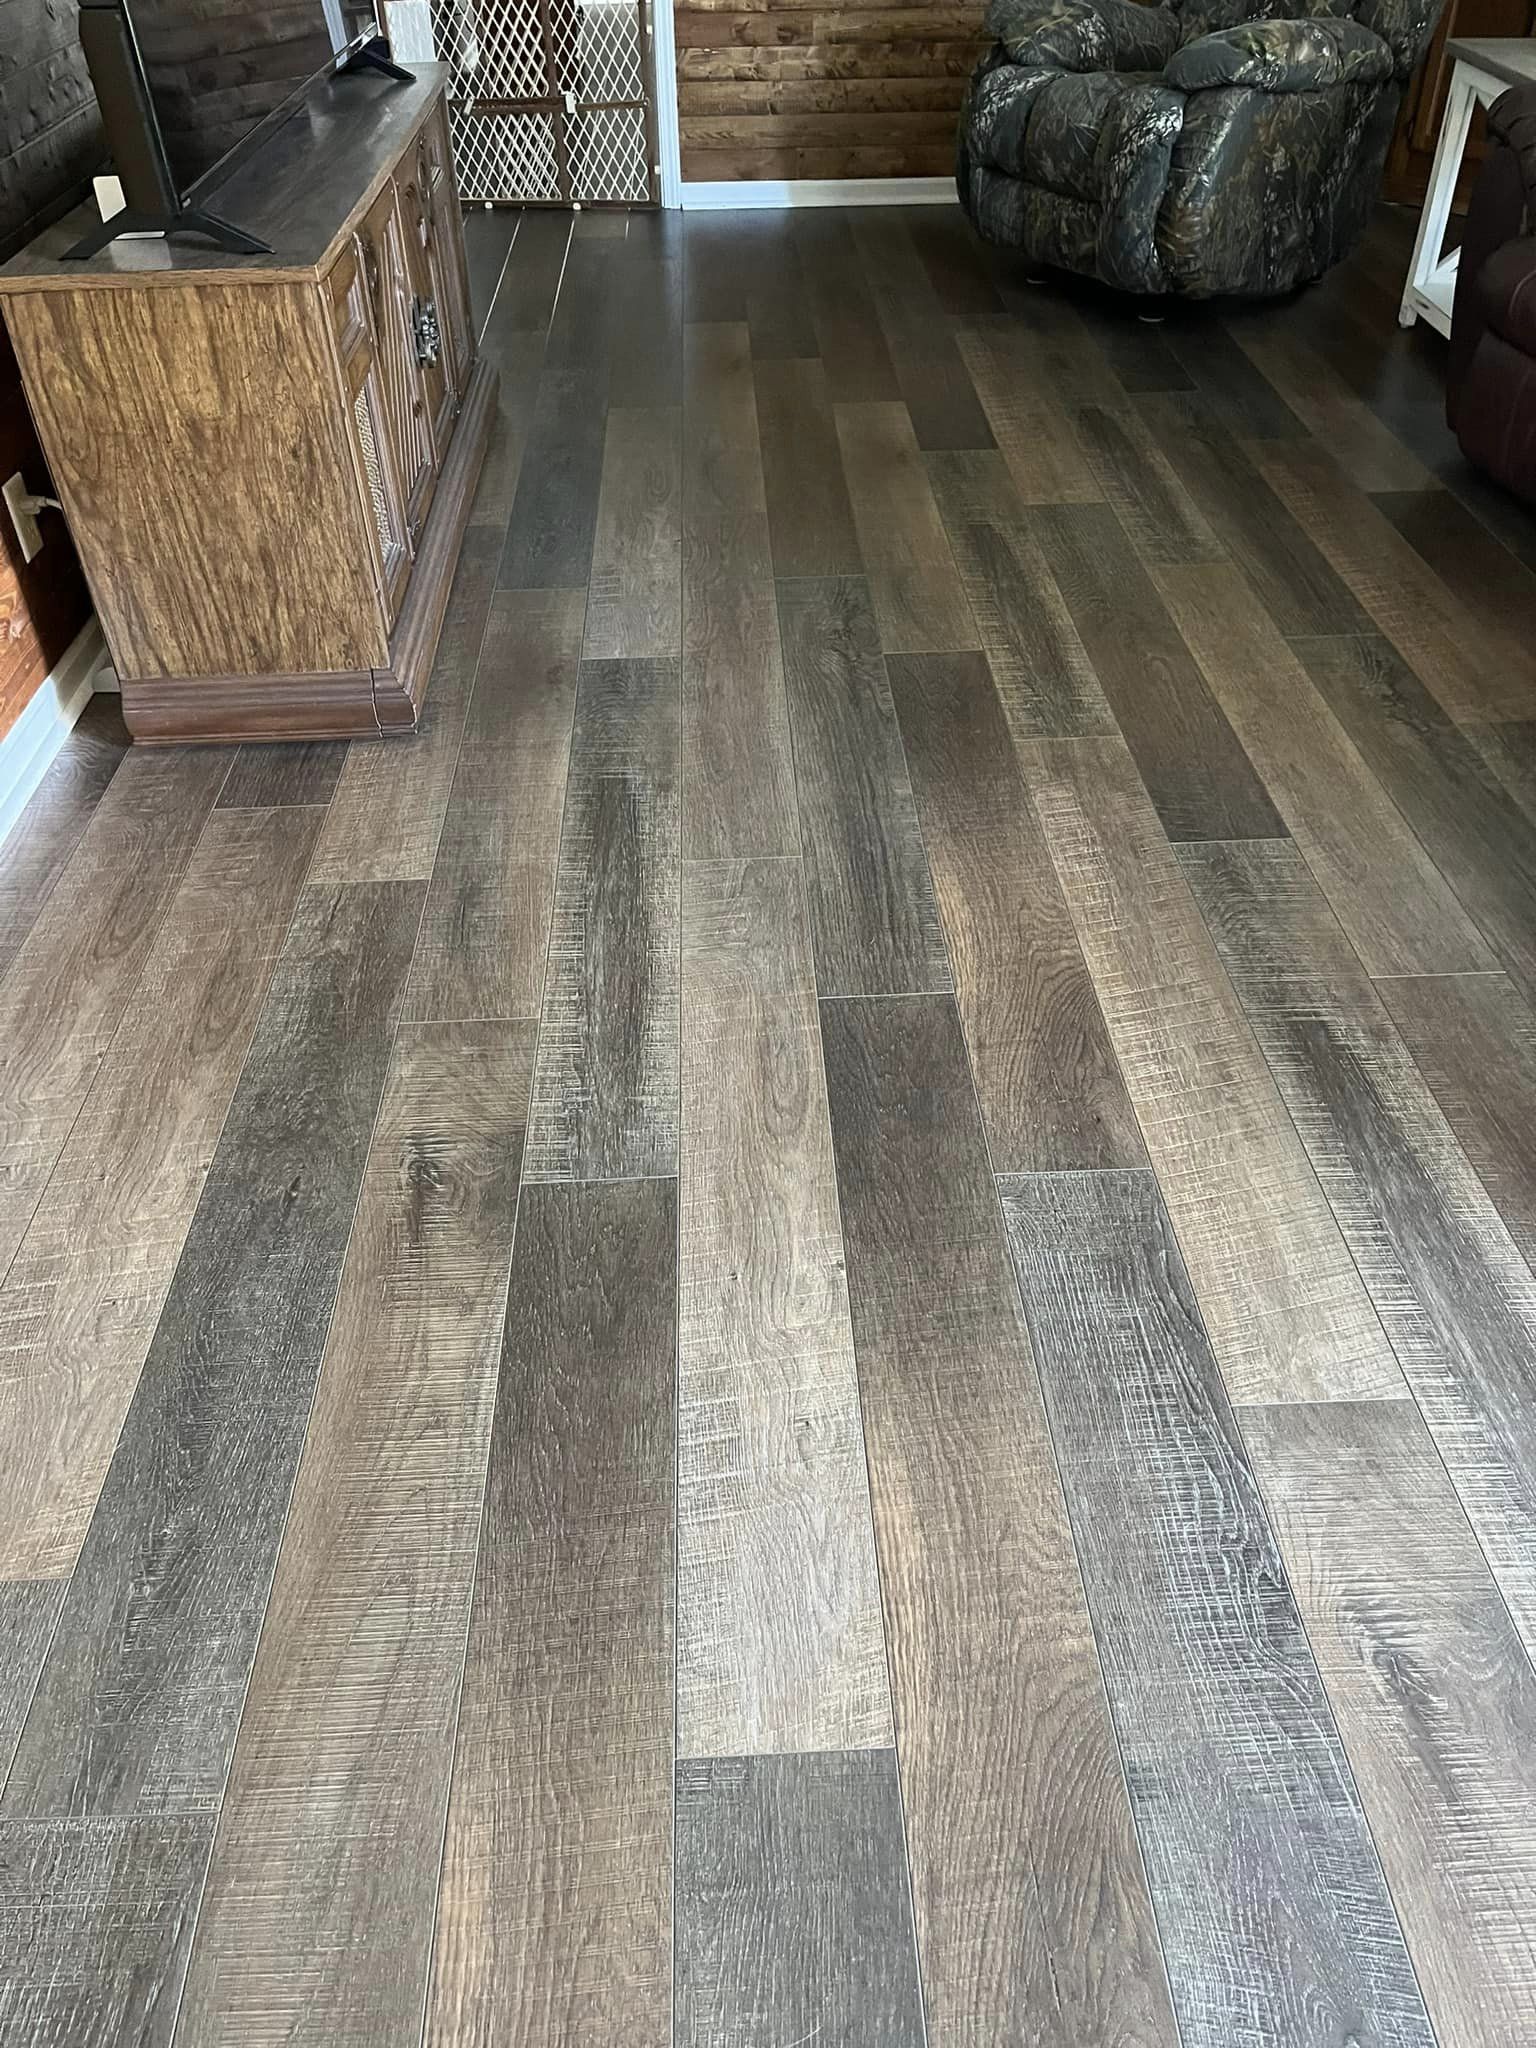 Chapman's Flooring, L.L.C. 2792 US-31W, White House Tennessee 37188